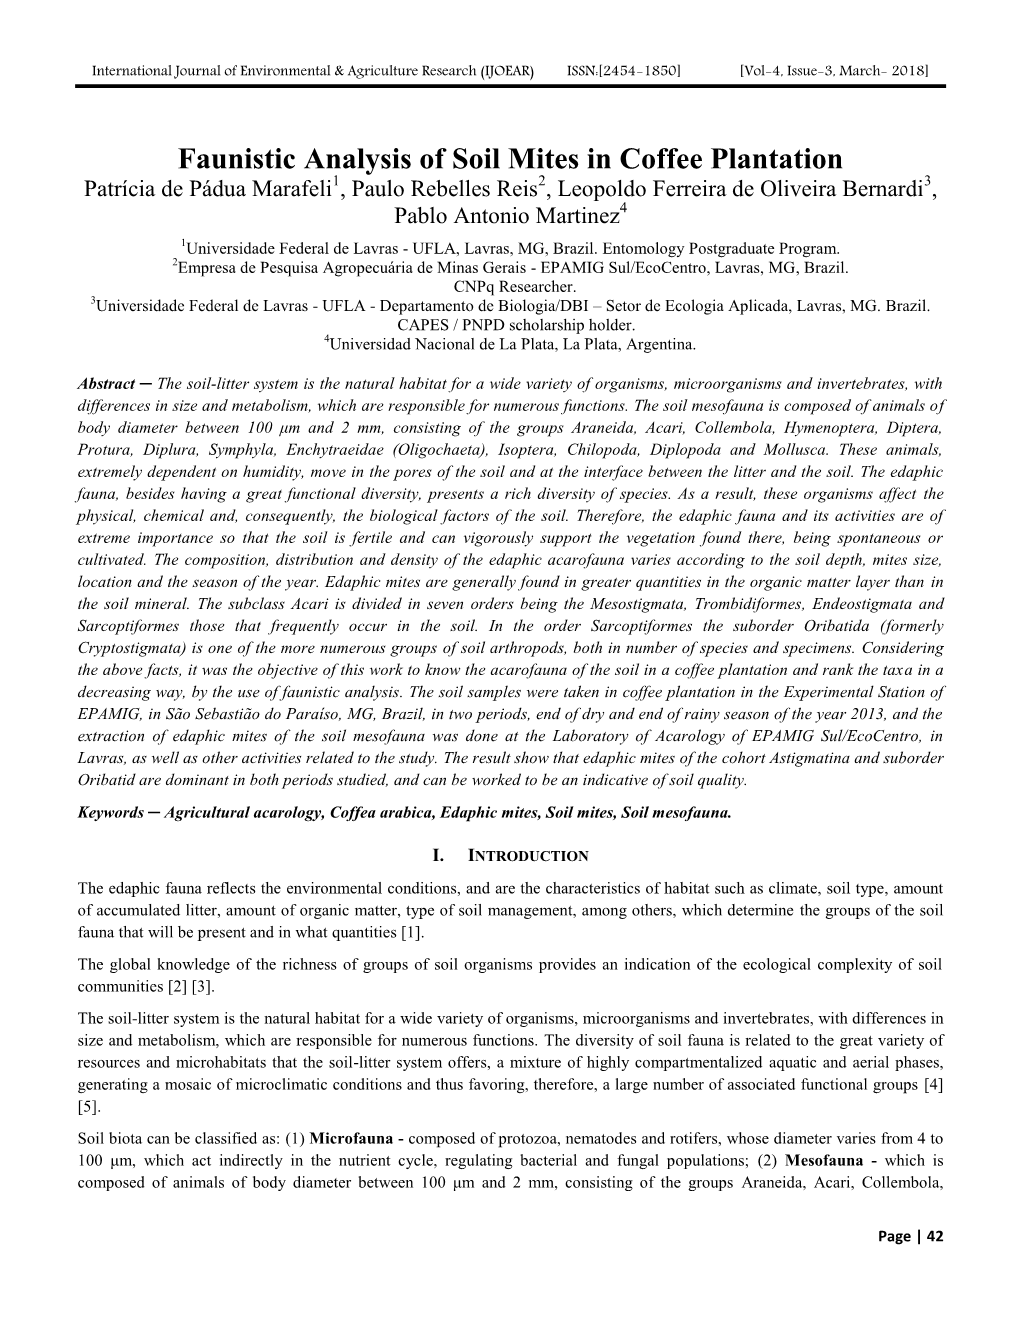 Faunistic Analysis of Soil Mites in Coffee Plantation